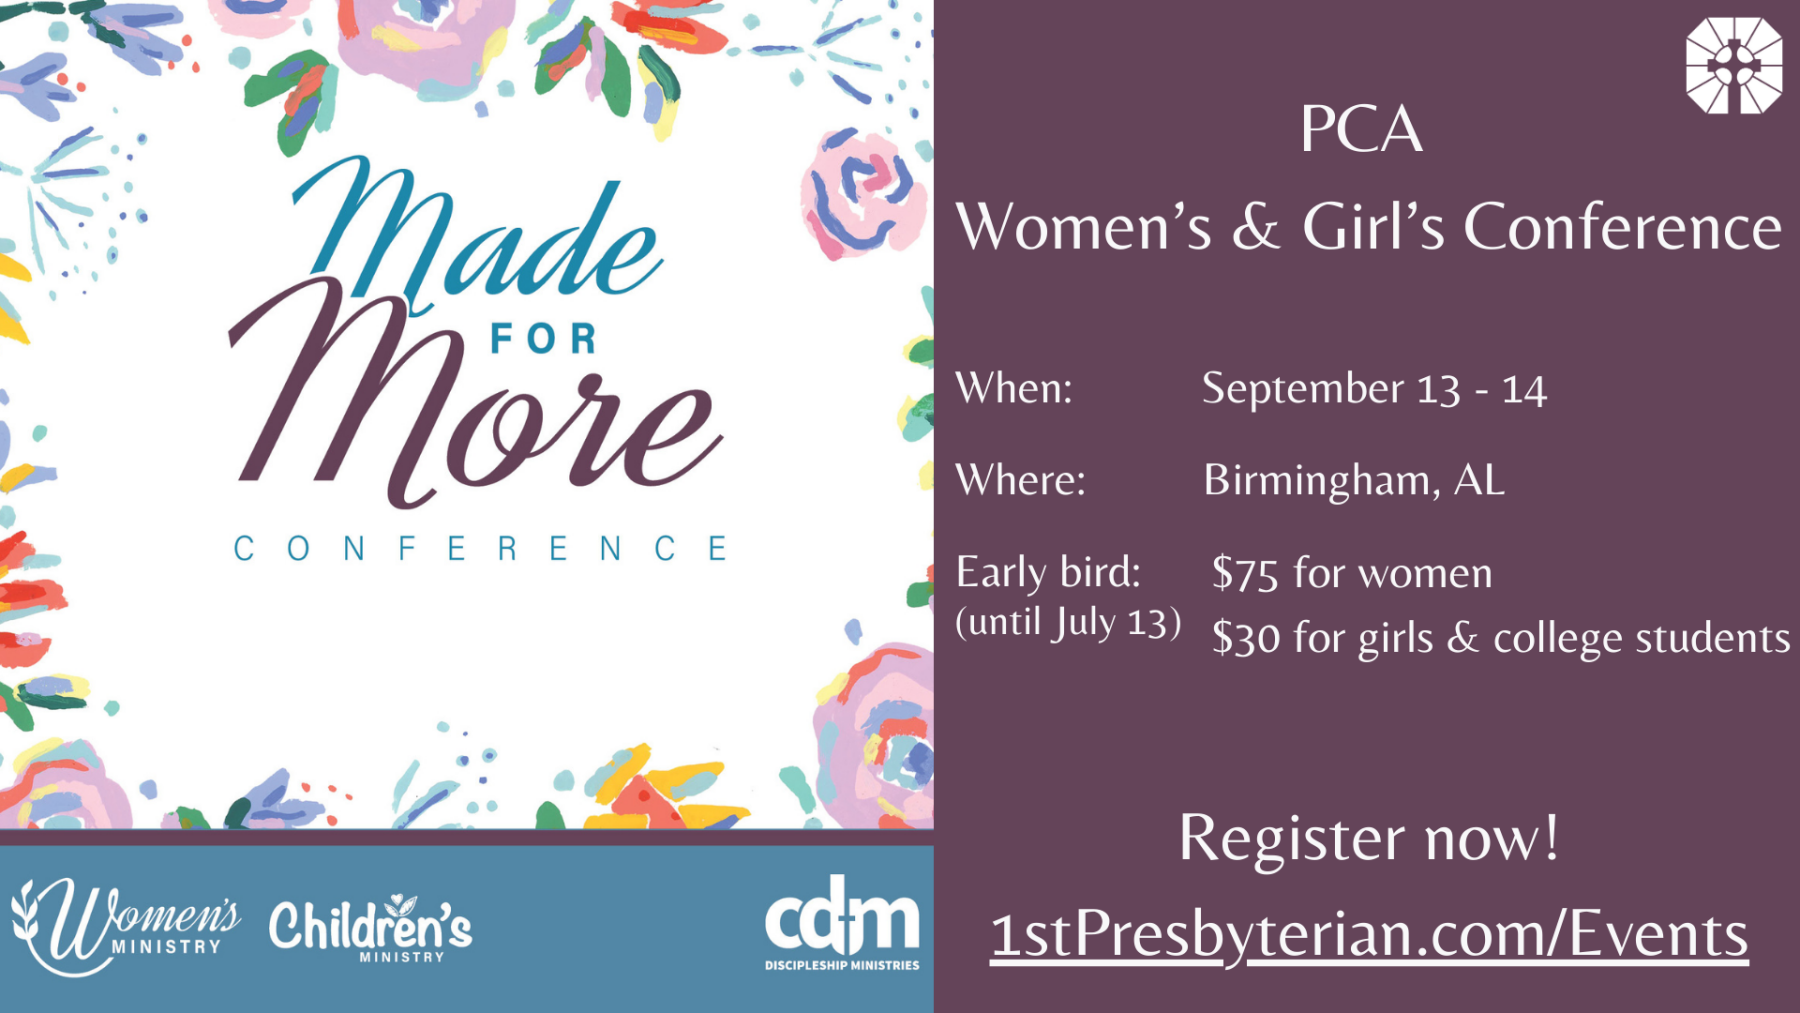 PCA Women's & Girl's Conference